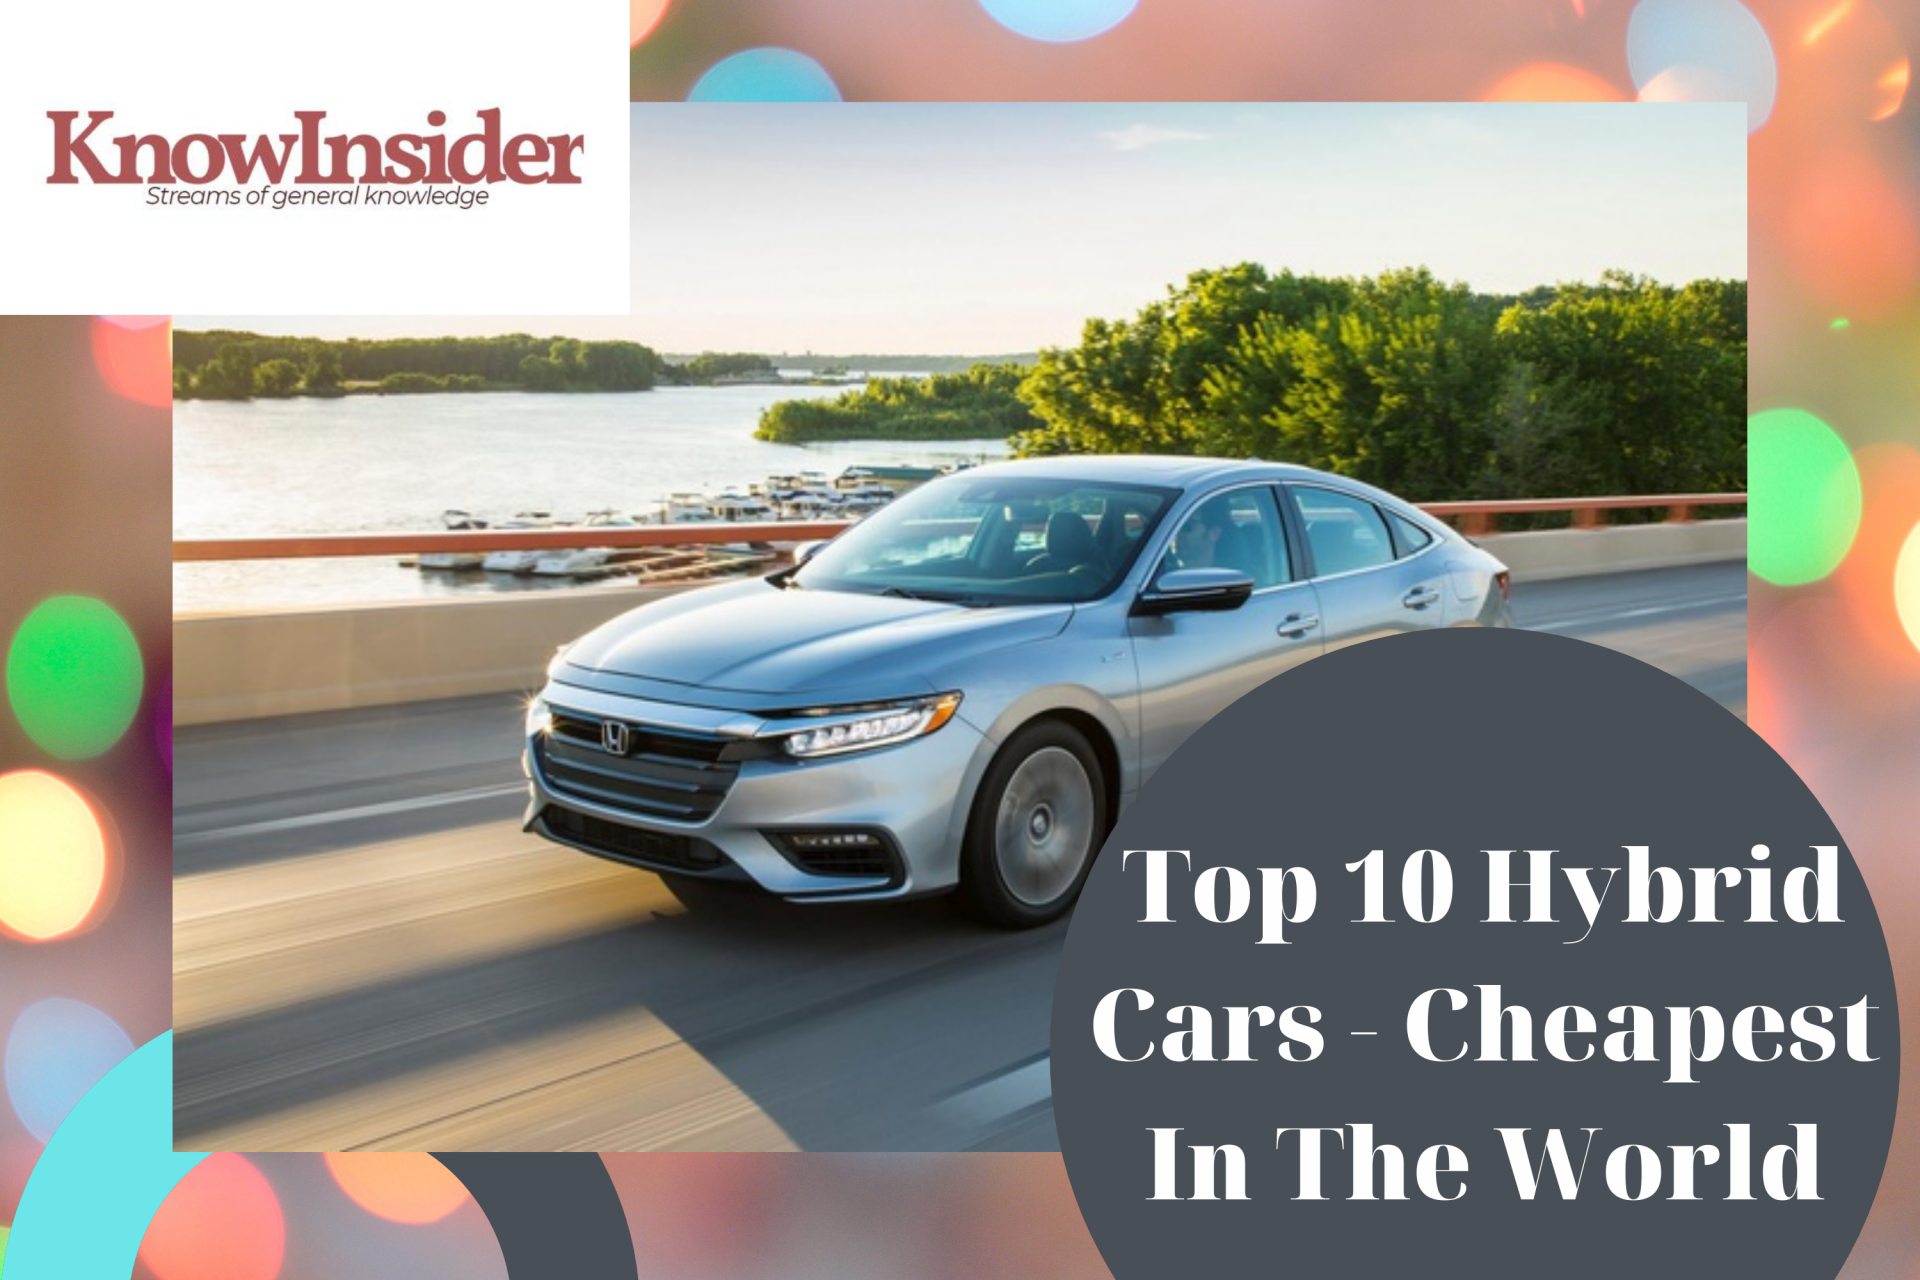 Top 10 Hybrid Cars - Cheapest In The World